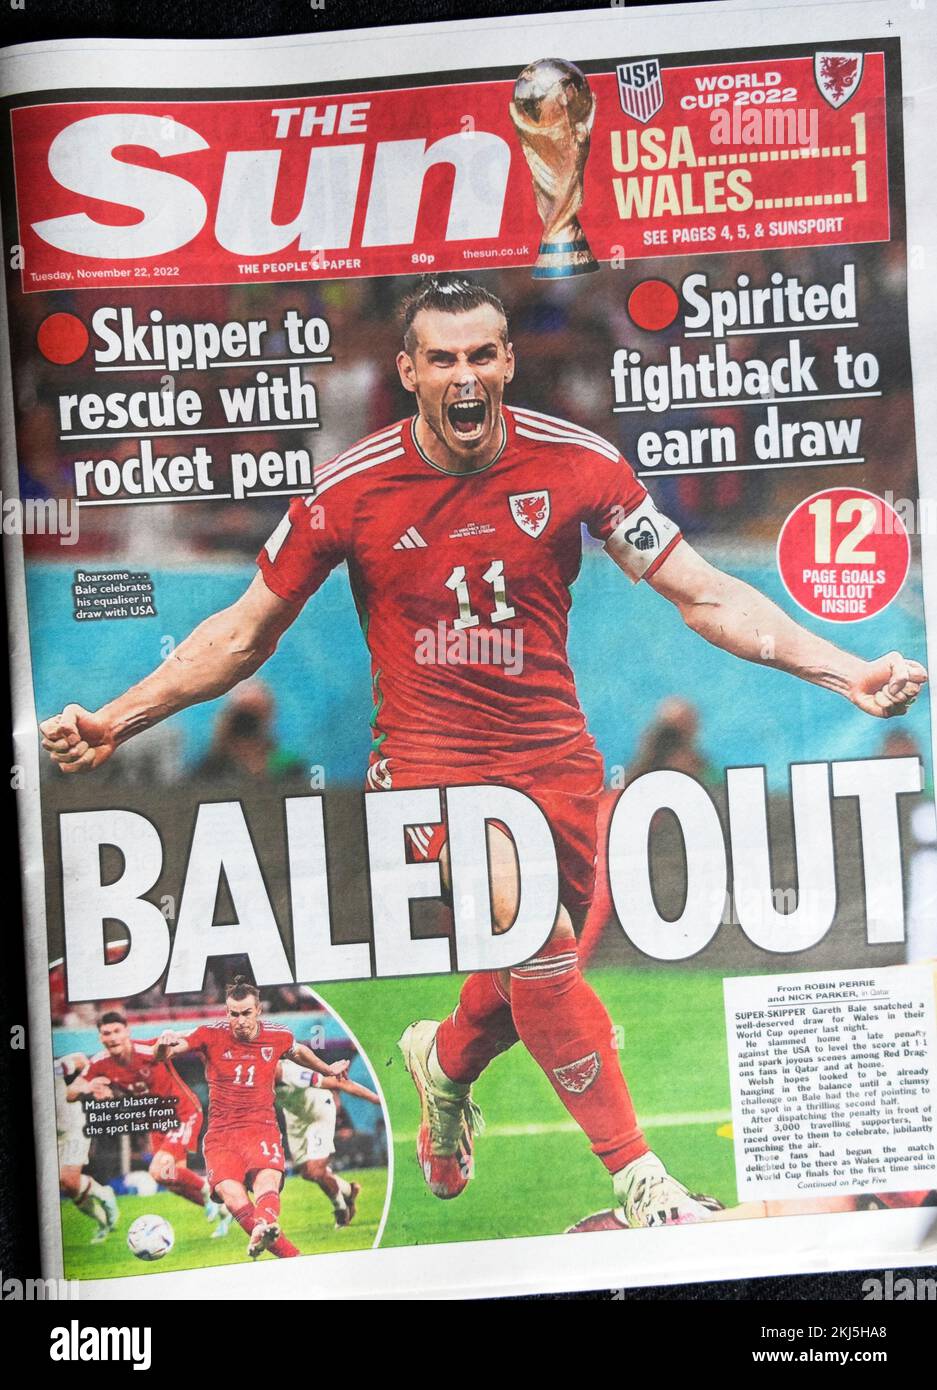 The Sun newspaper front page after Gareth Bale Wales captain scores goal vs US in 2022 World Cup game Qatar 22 November 2022 London UK Great Britain Stock Photo